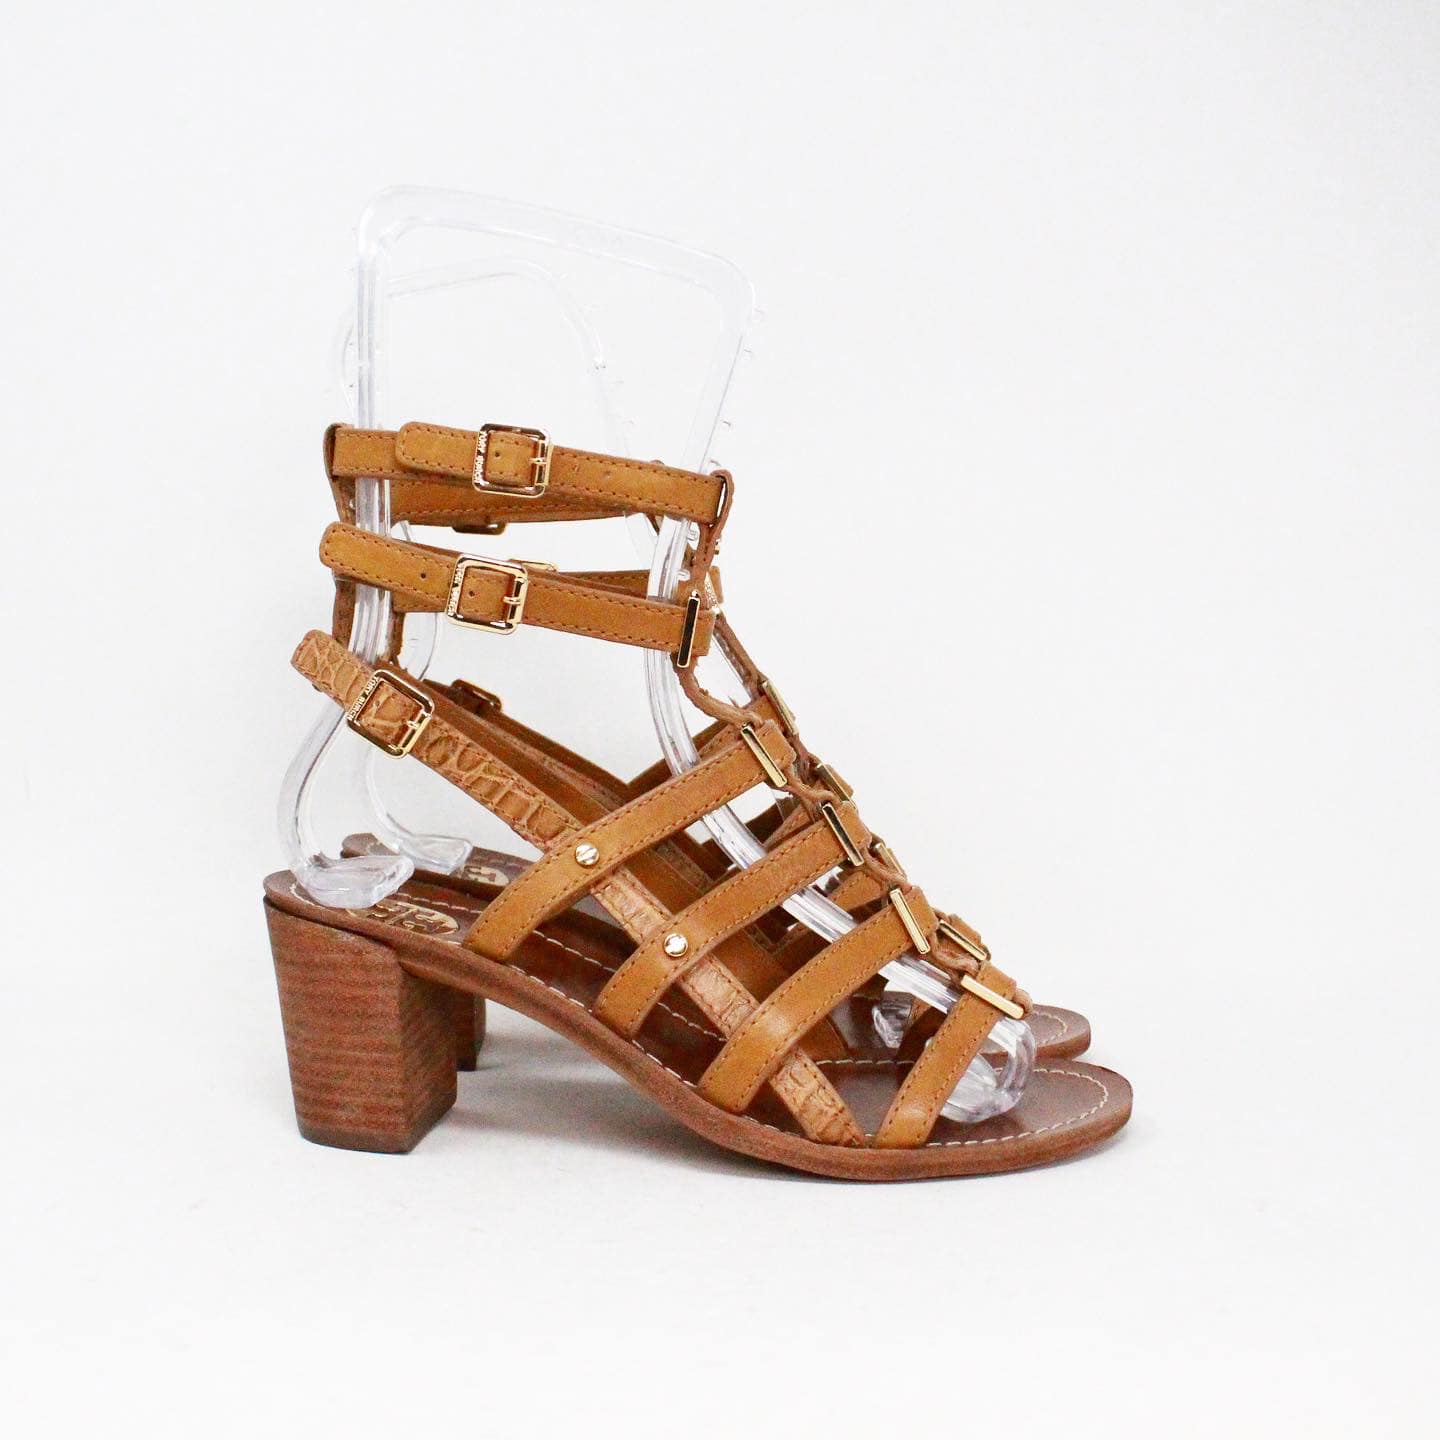 TORY BURCH Brown Leather Strap Sandals US 6 EU 36 item 40861 2